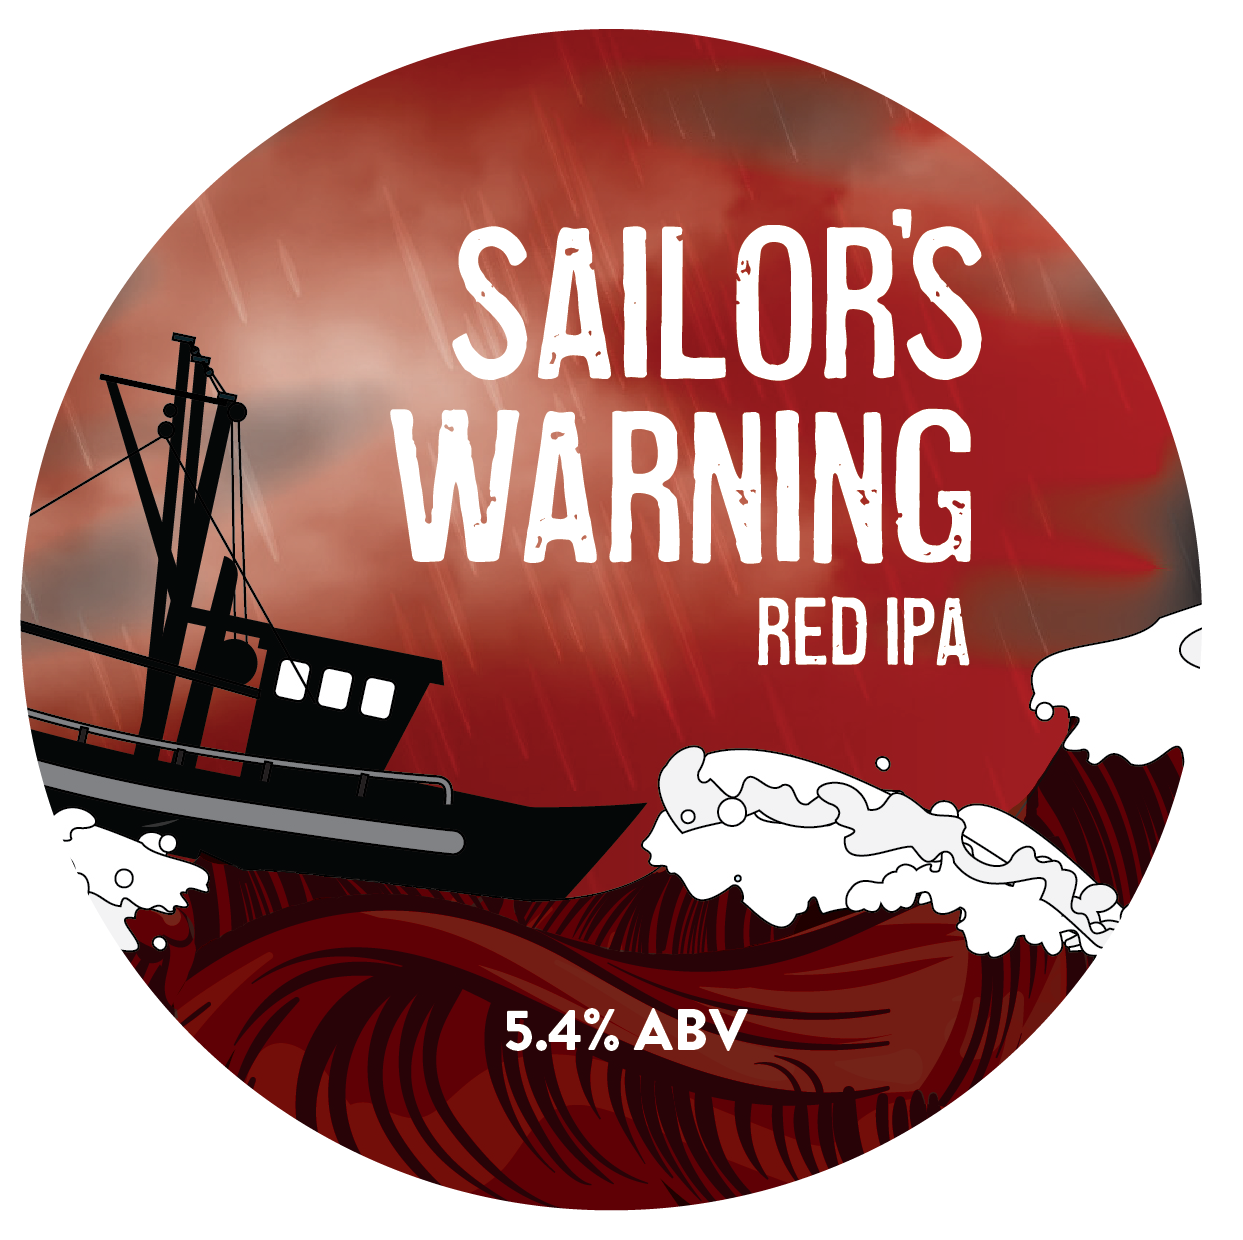 Sprig and Fern Sailor's Warning Red IPA tap badge